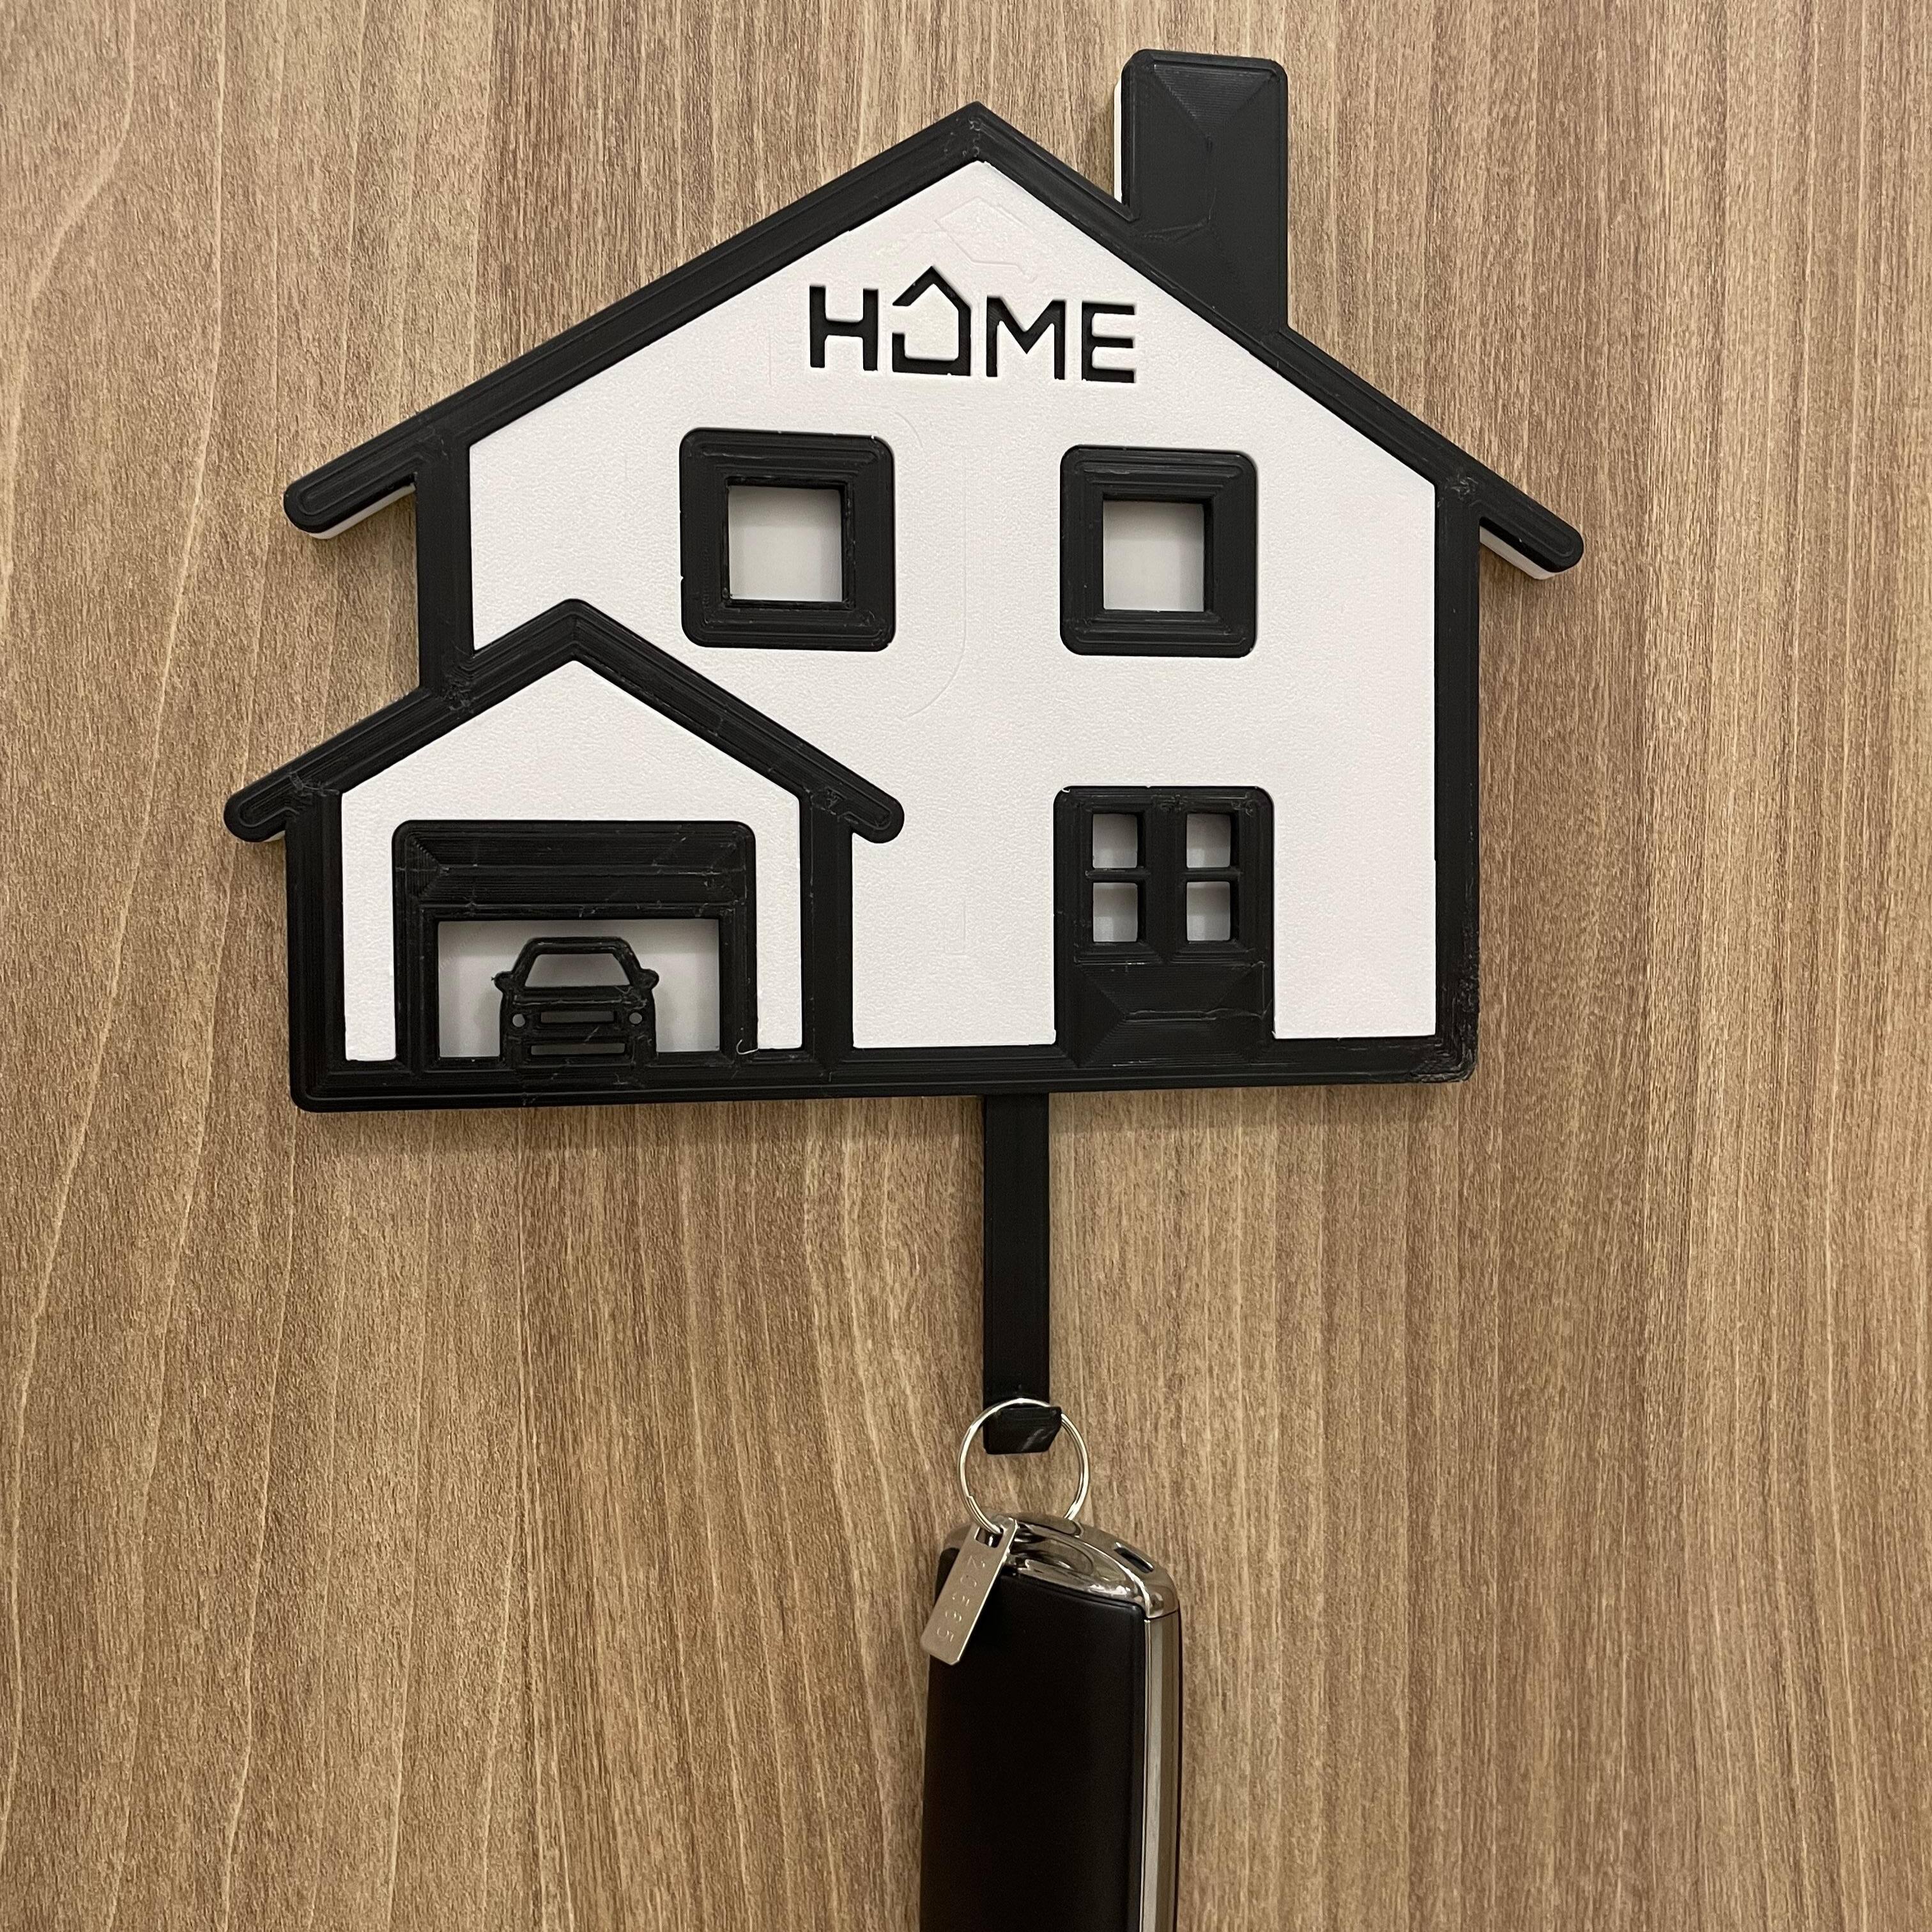 HOME KEY HOLDER FOR WALL EASY PRINT